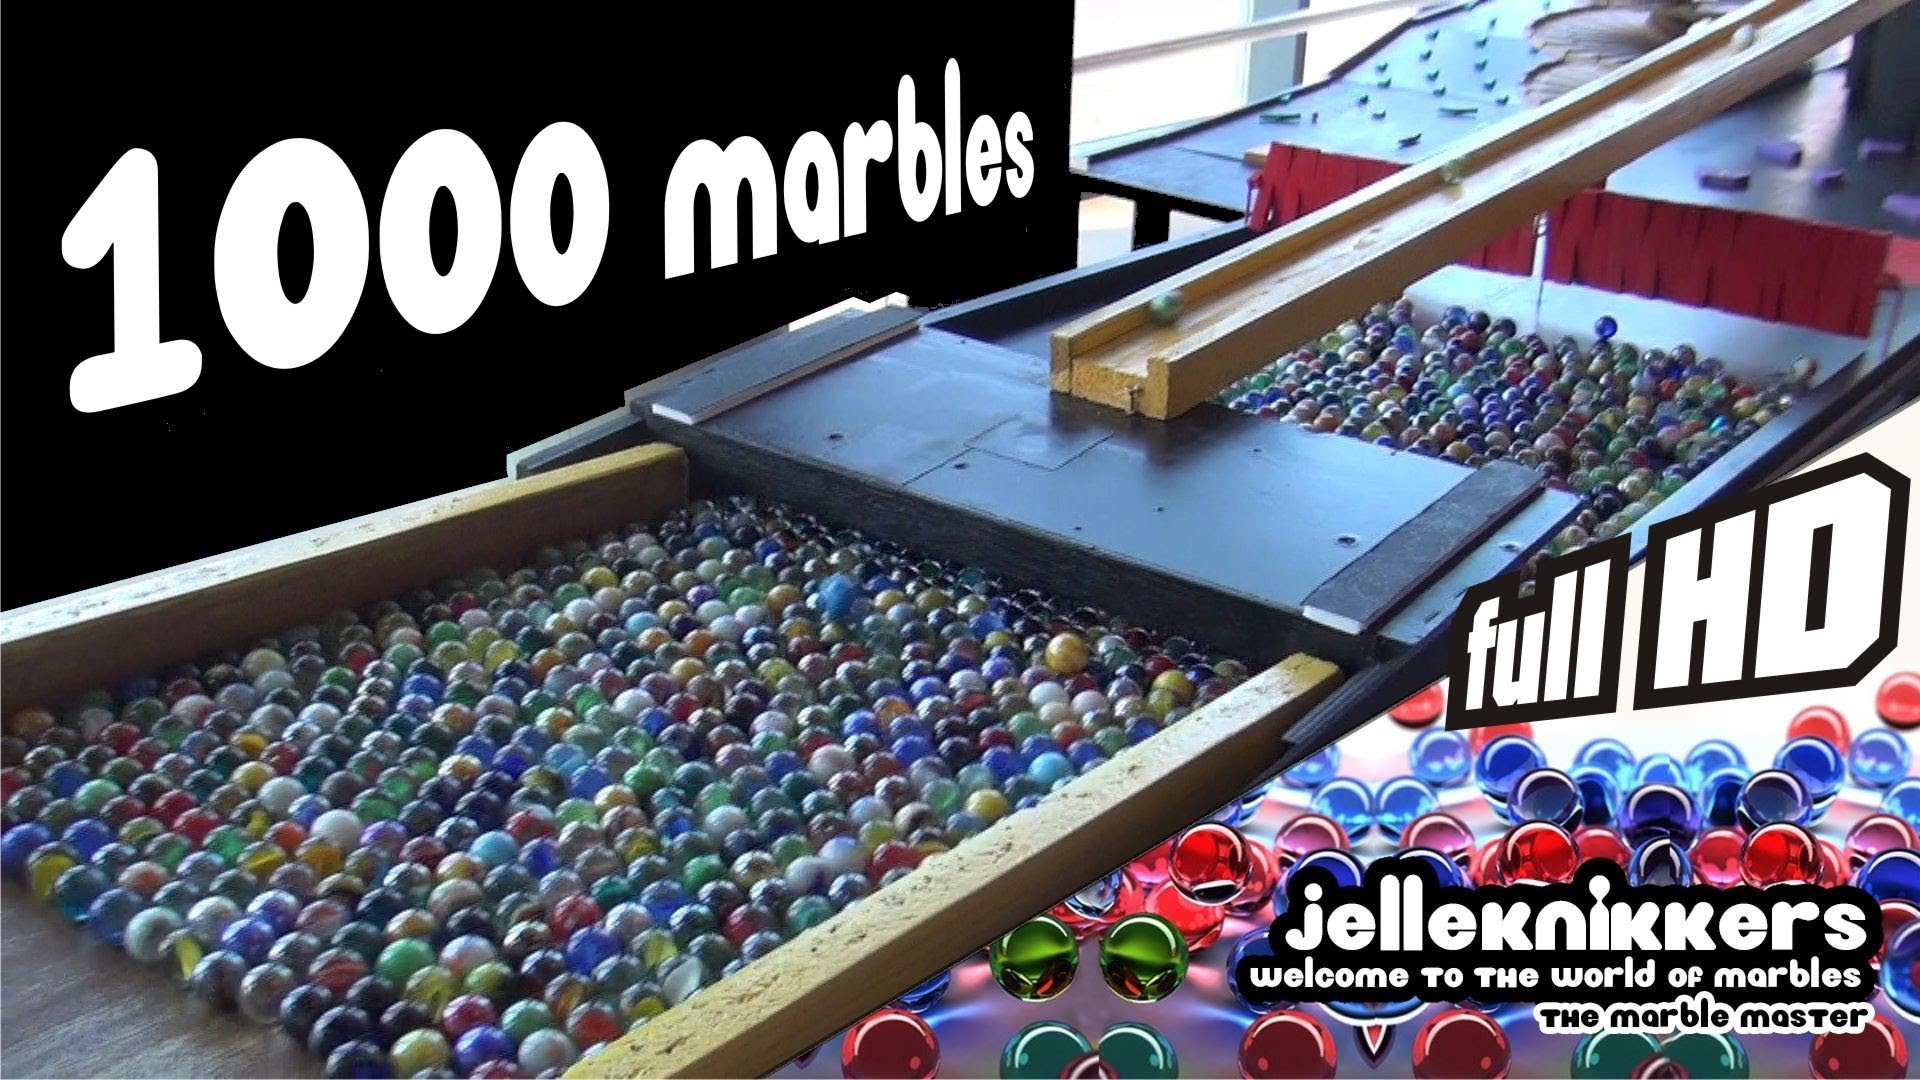 biggest marble run in the world